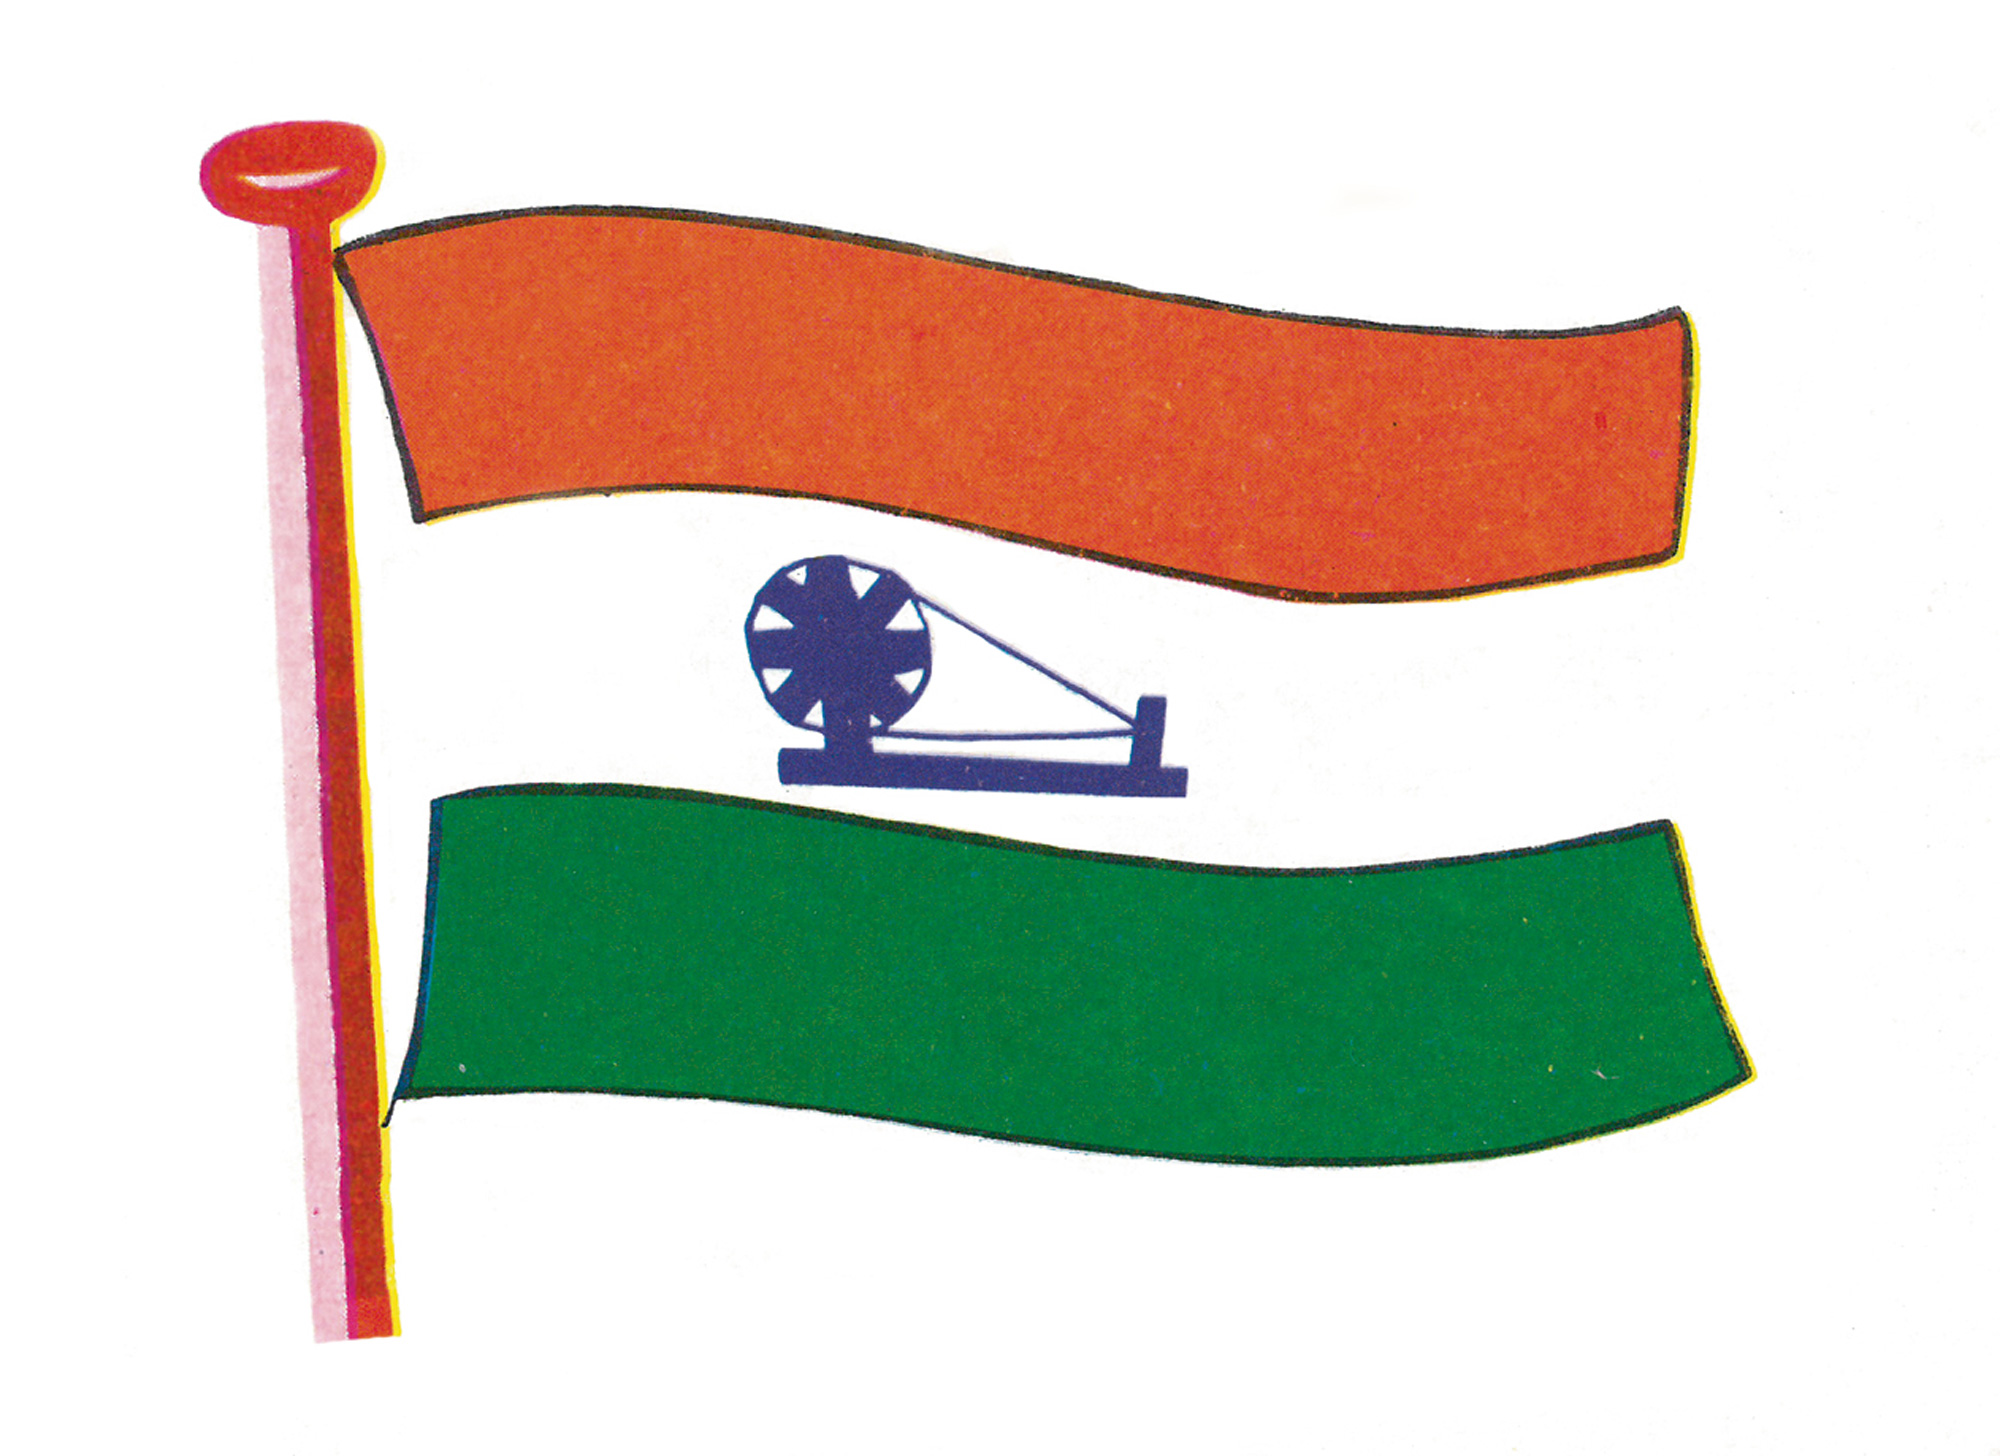 An illustration of the Indian flag with a spinning wheel at its center.